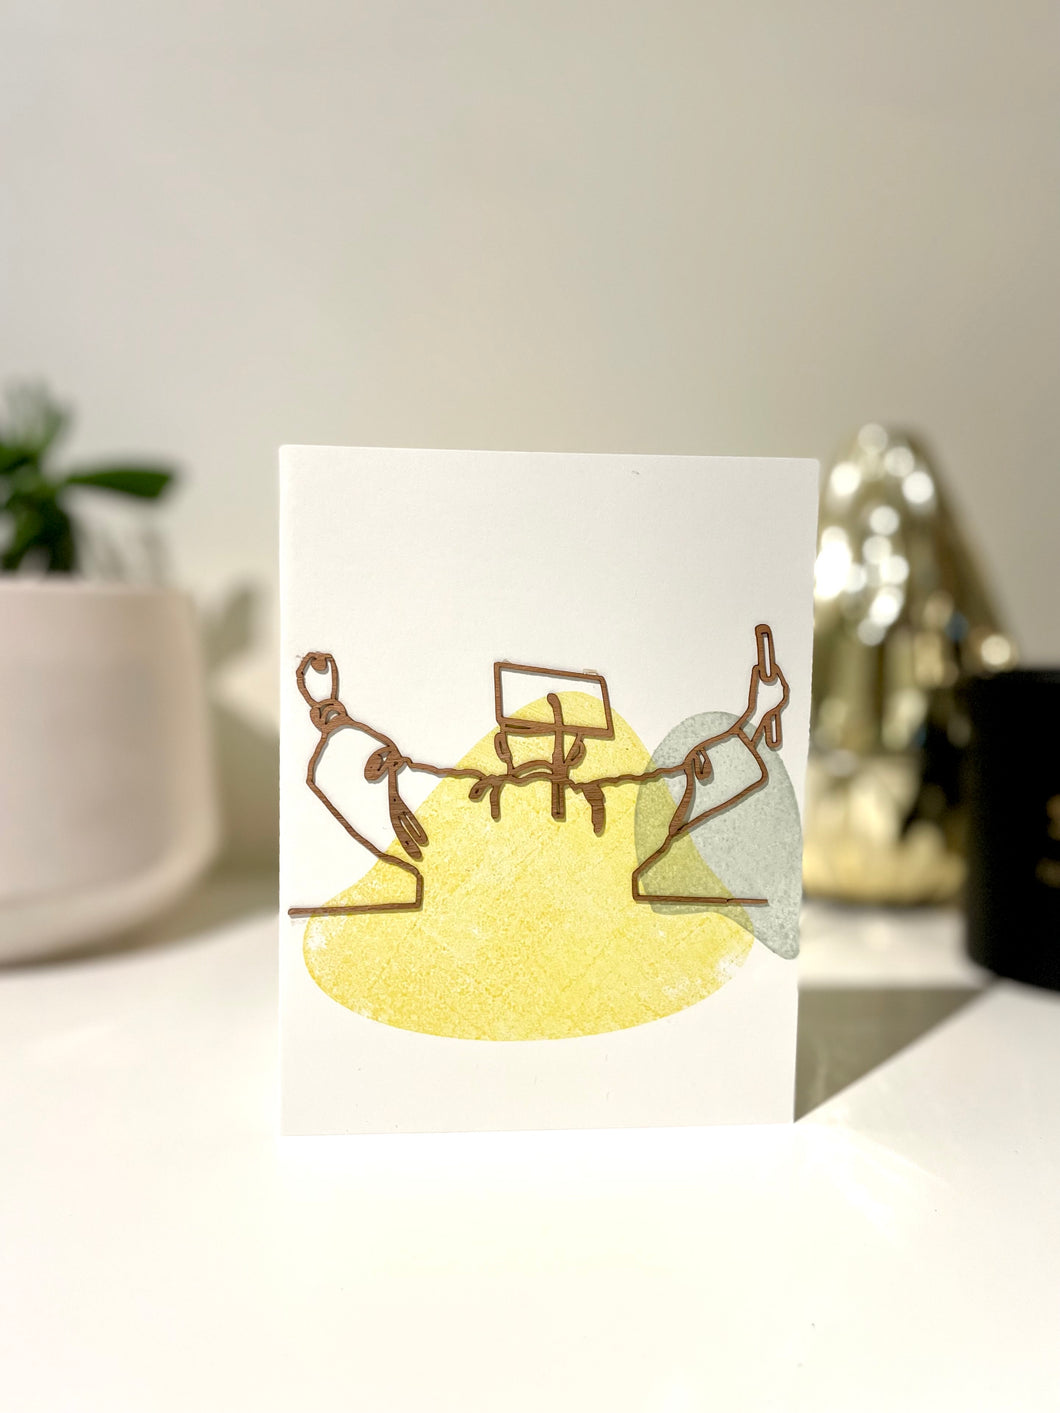 Graduate greeting card with wooden design